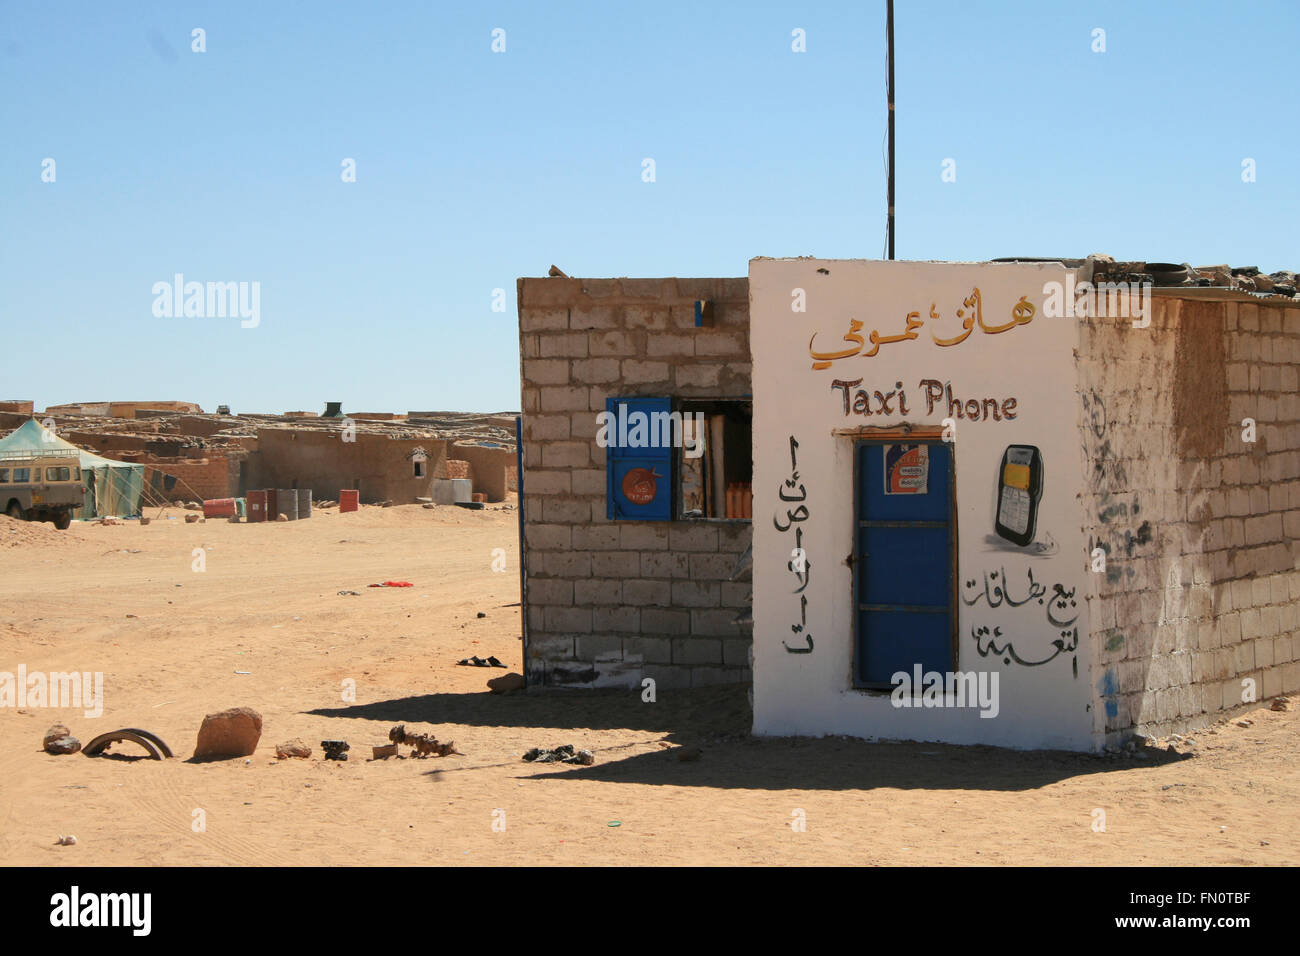 Taxi phone shop in Tindouf's refugee camp in sahara desert Stock Photo